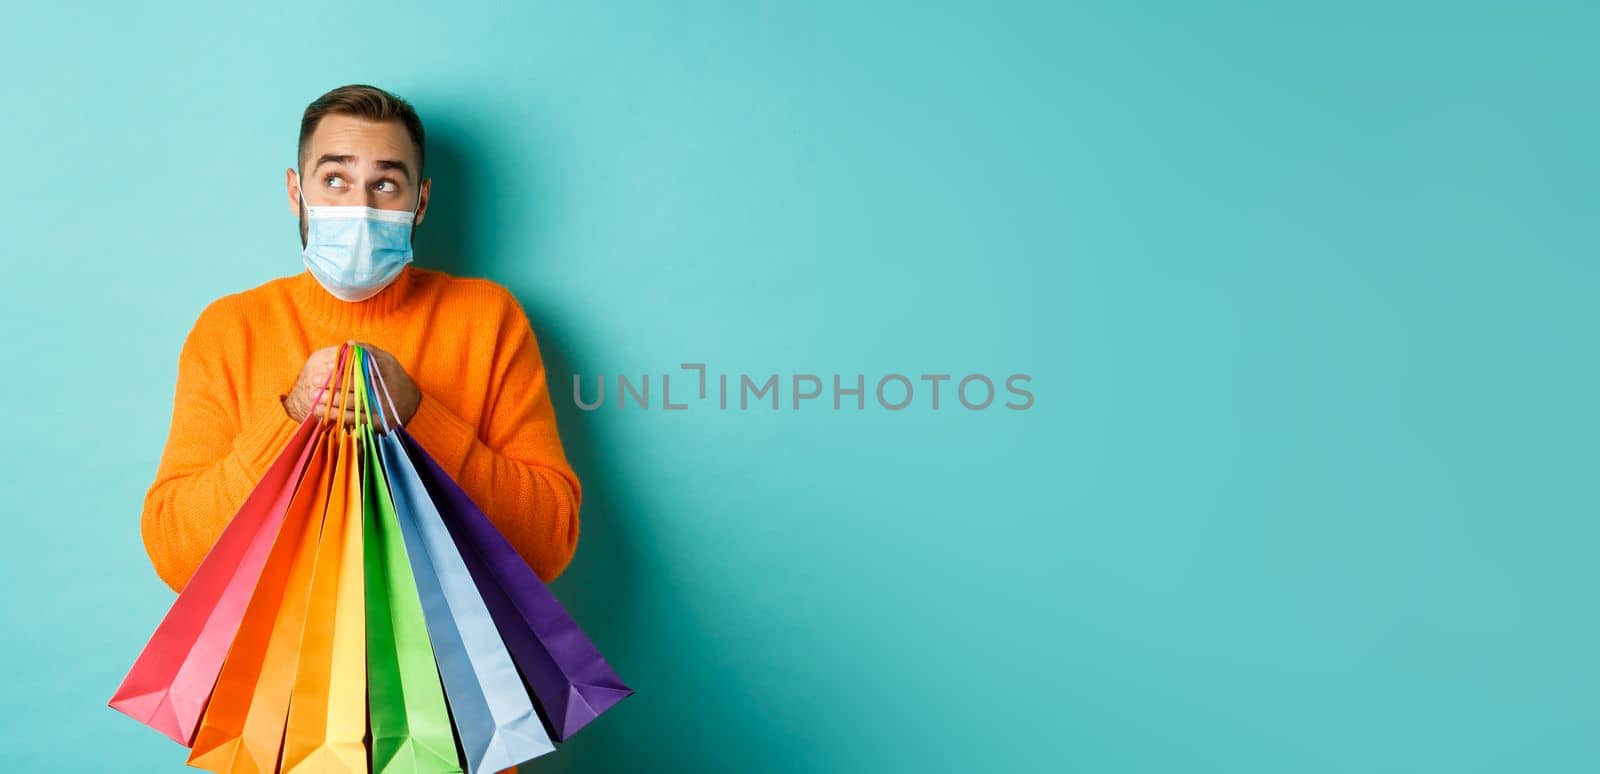 Covid-19, pandemic and lifestyle concept. Man thinking, wearing face mask, holding shopping bags, imaging something, standing over turquoise background by Benzoix